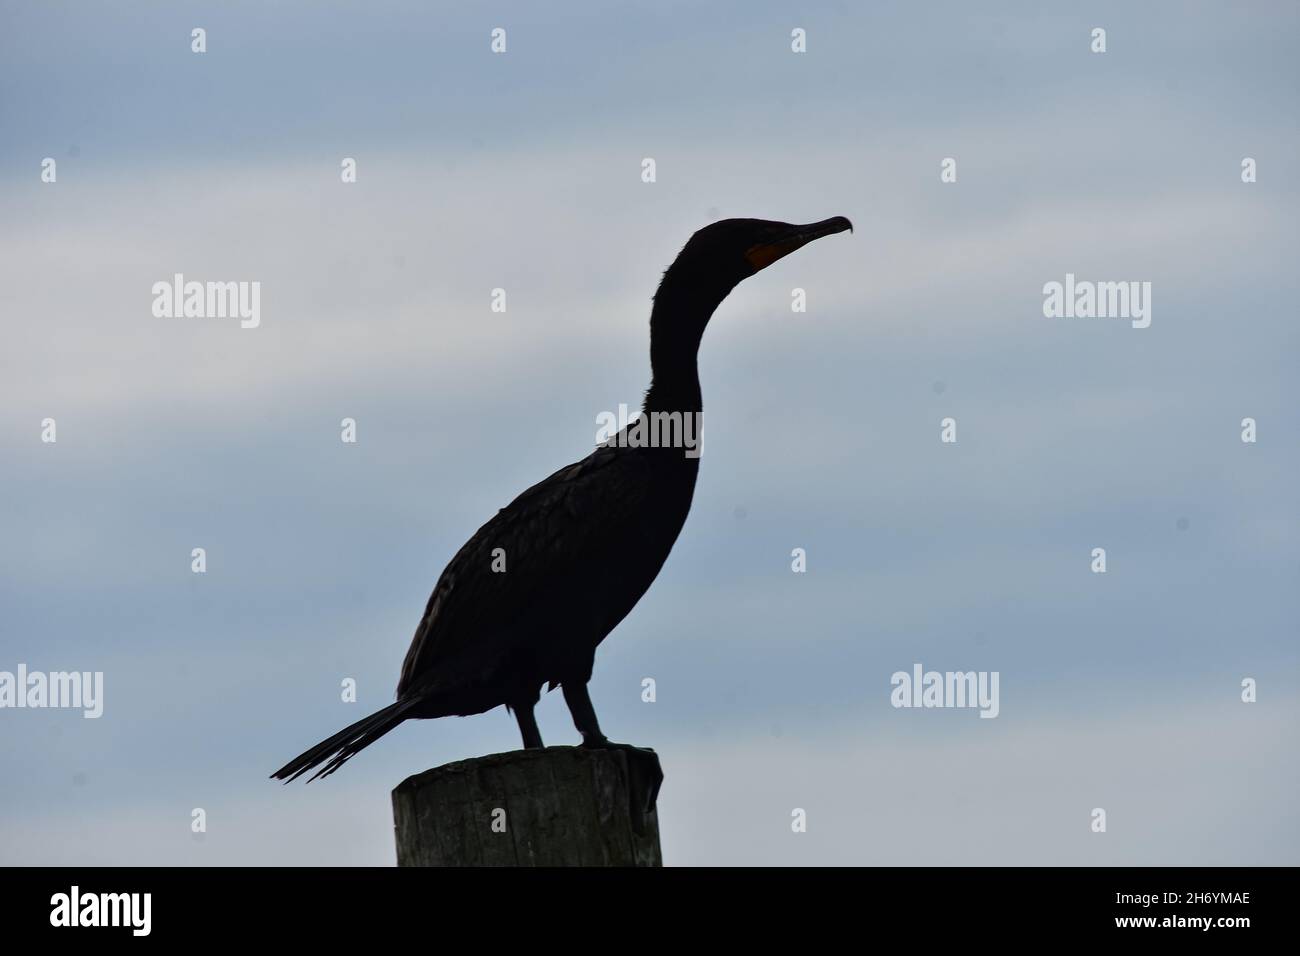 Silhouette of a Double-crested Cormorant (Phalacrocorax auritus) standing on a piling. Copy space. Stock Photo